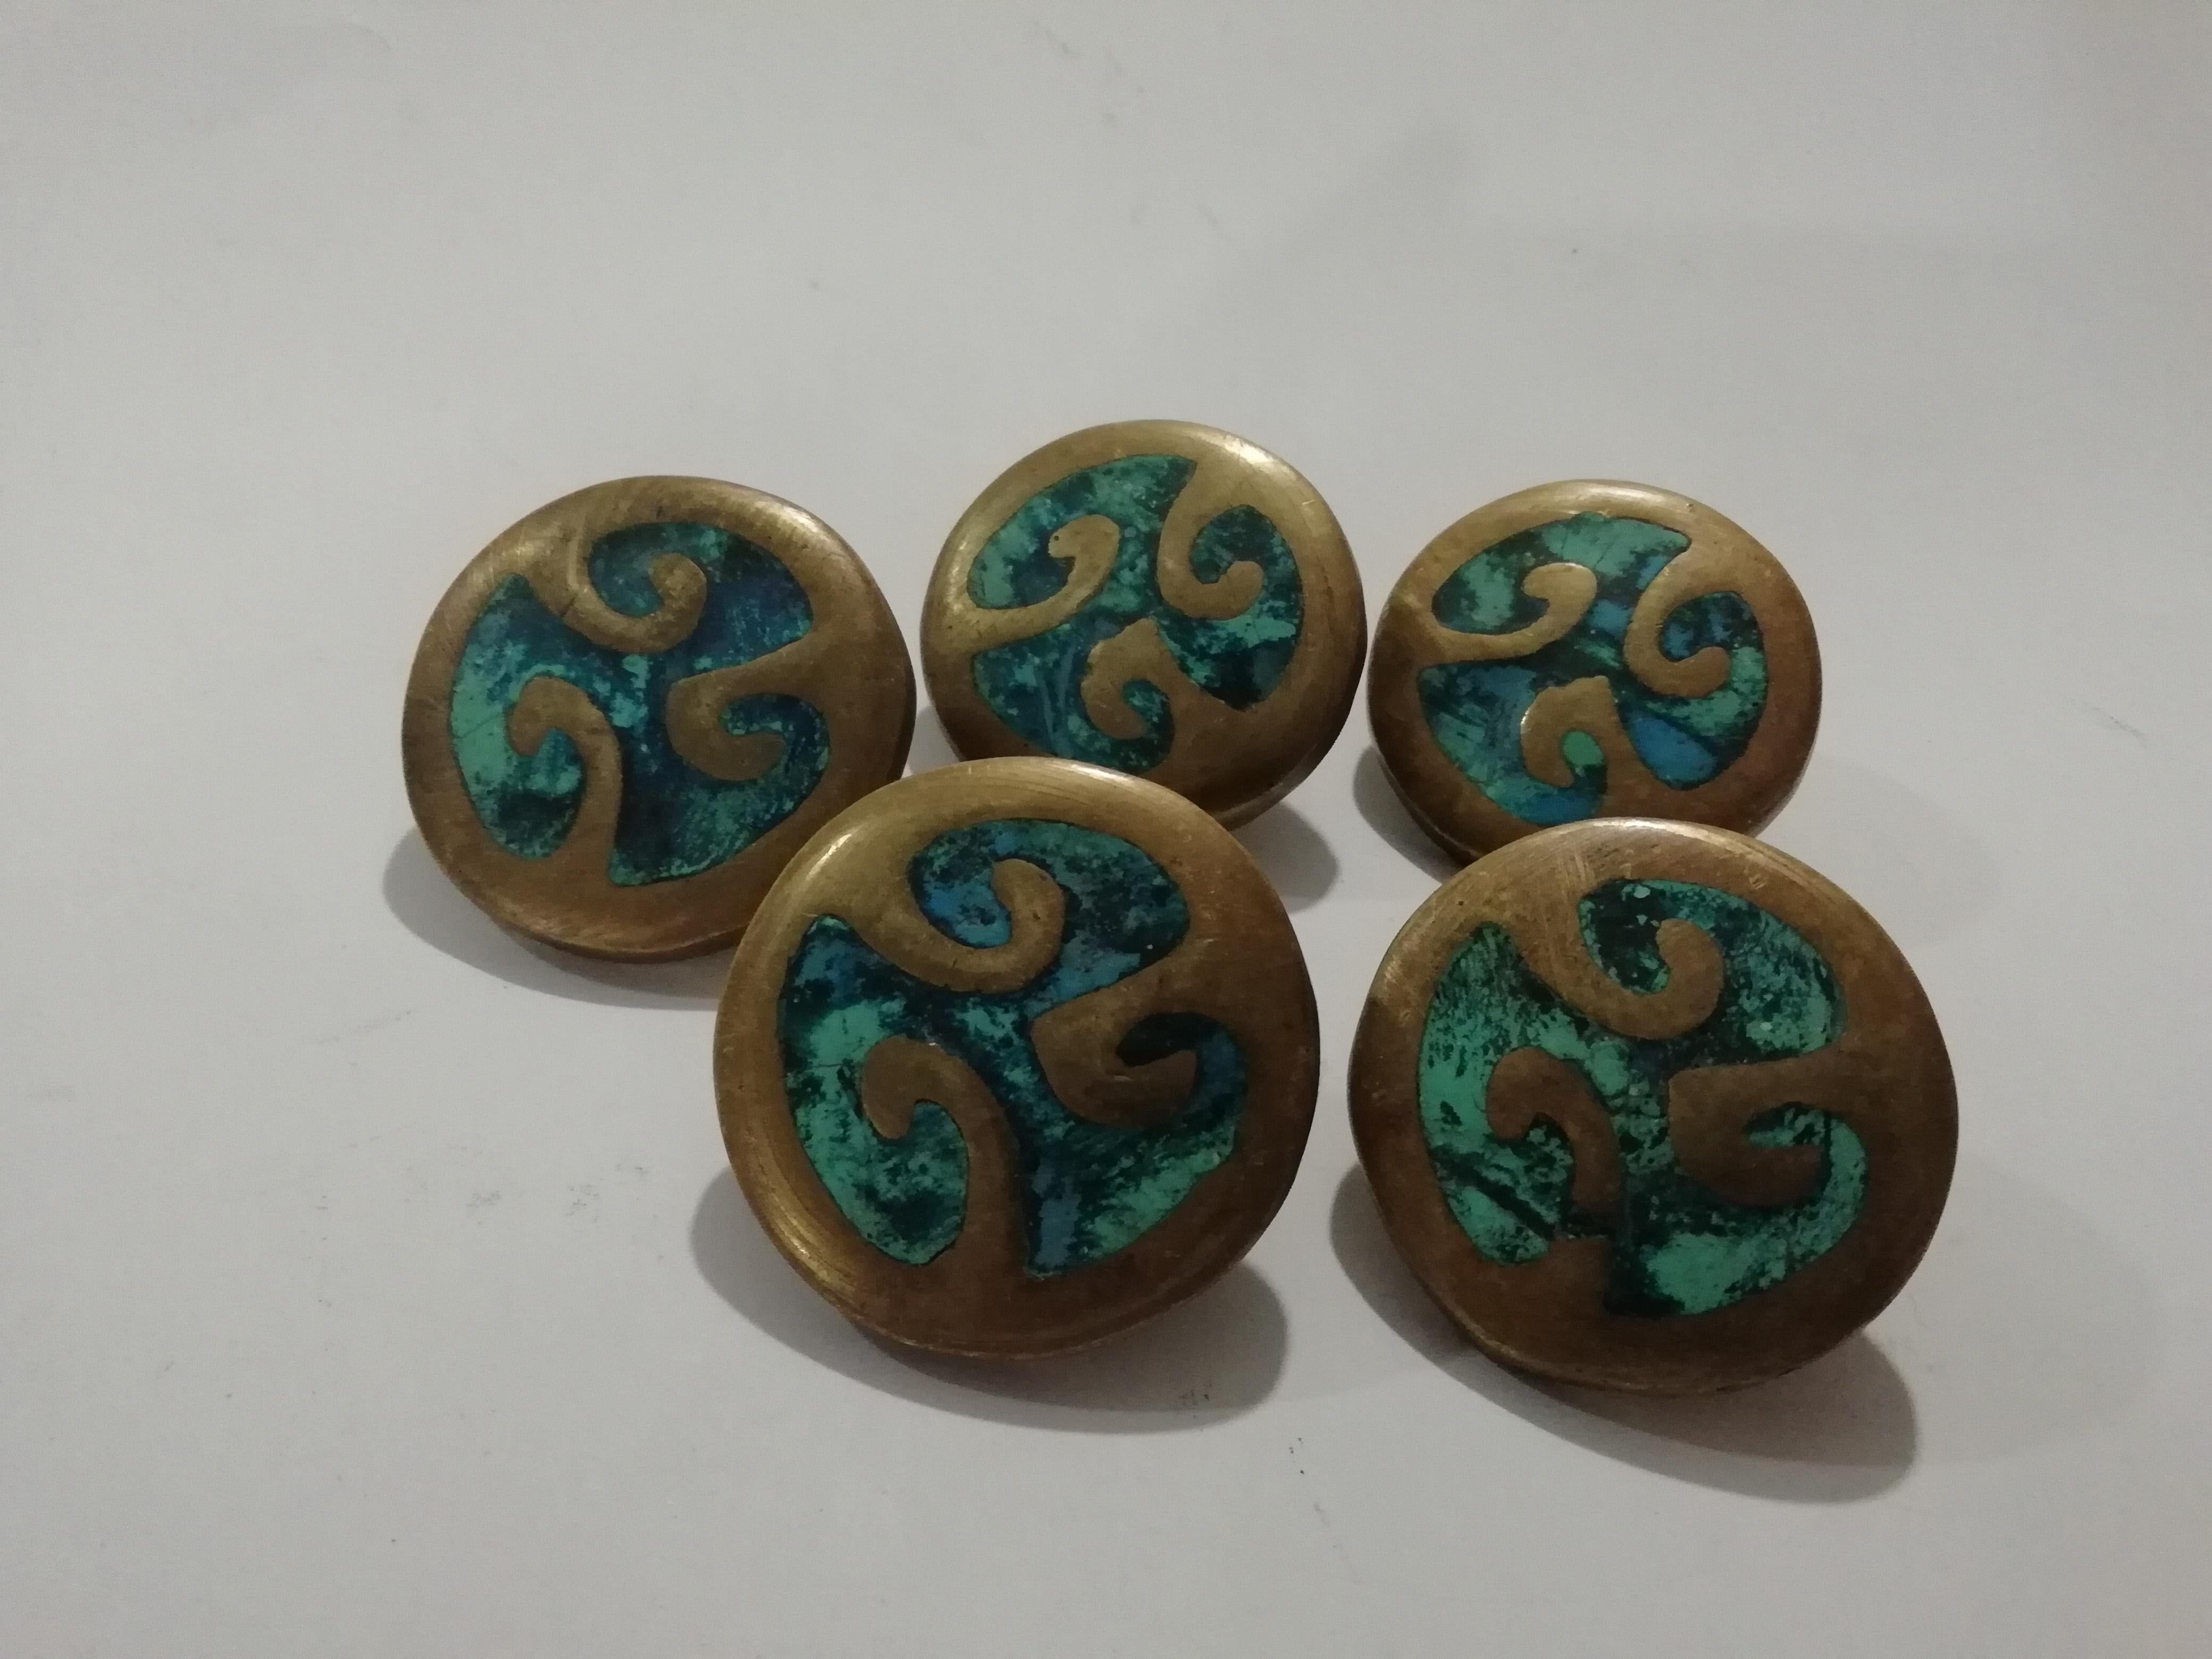 Beautiful set of 5 bronze pull knobs with inlayed chrysocolla stone by Mexican metalworker Pepe Mendoza. Round design with triskelion motif.

All 5 pieces are sealed on back.